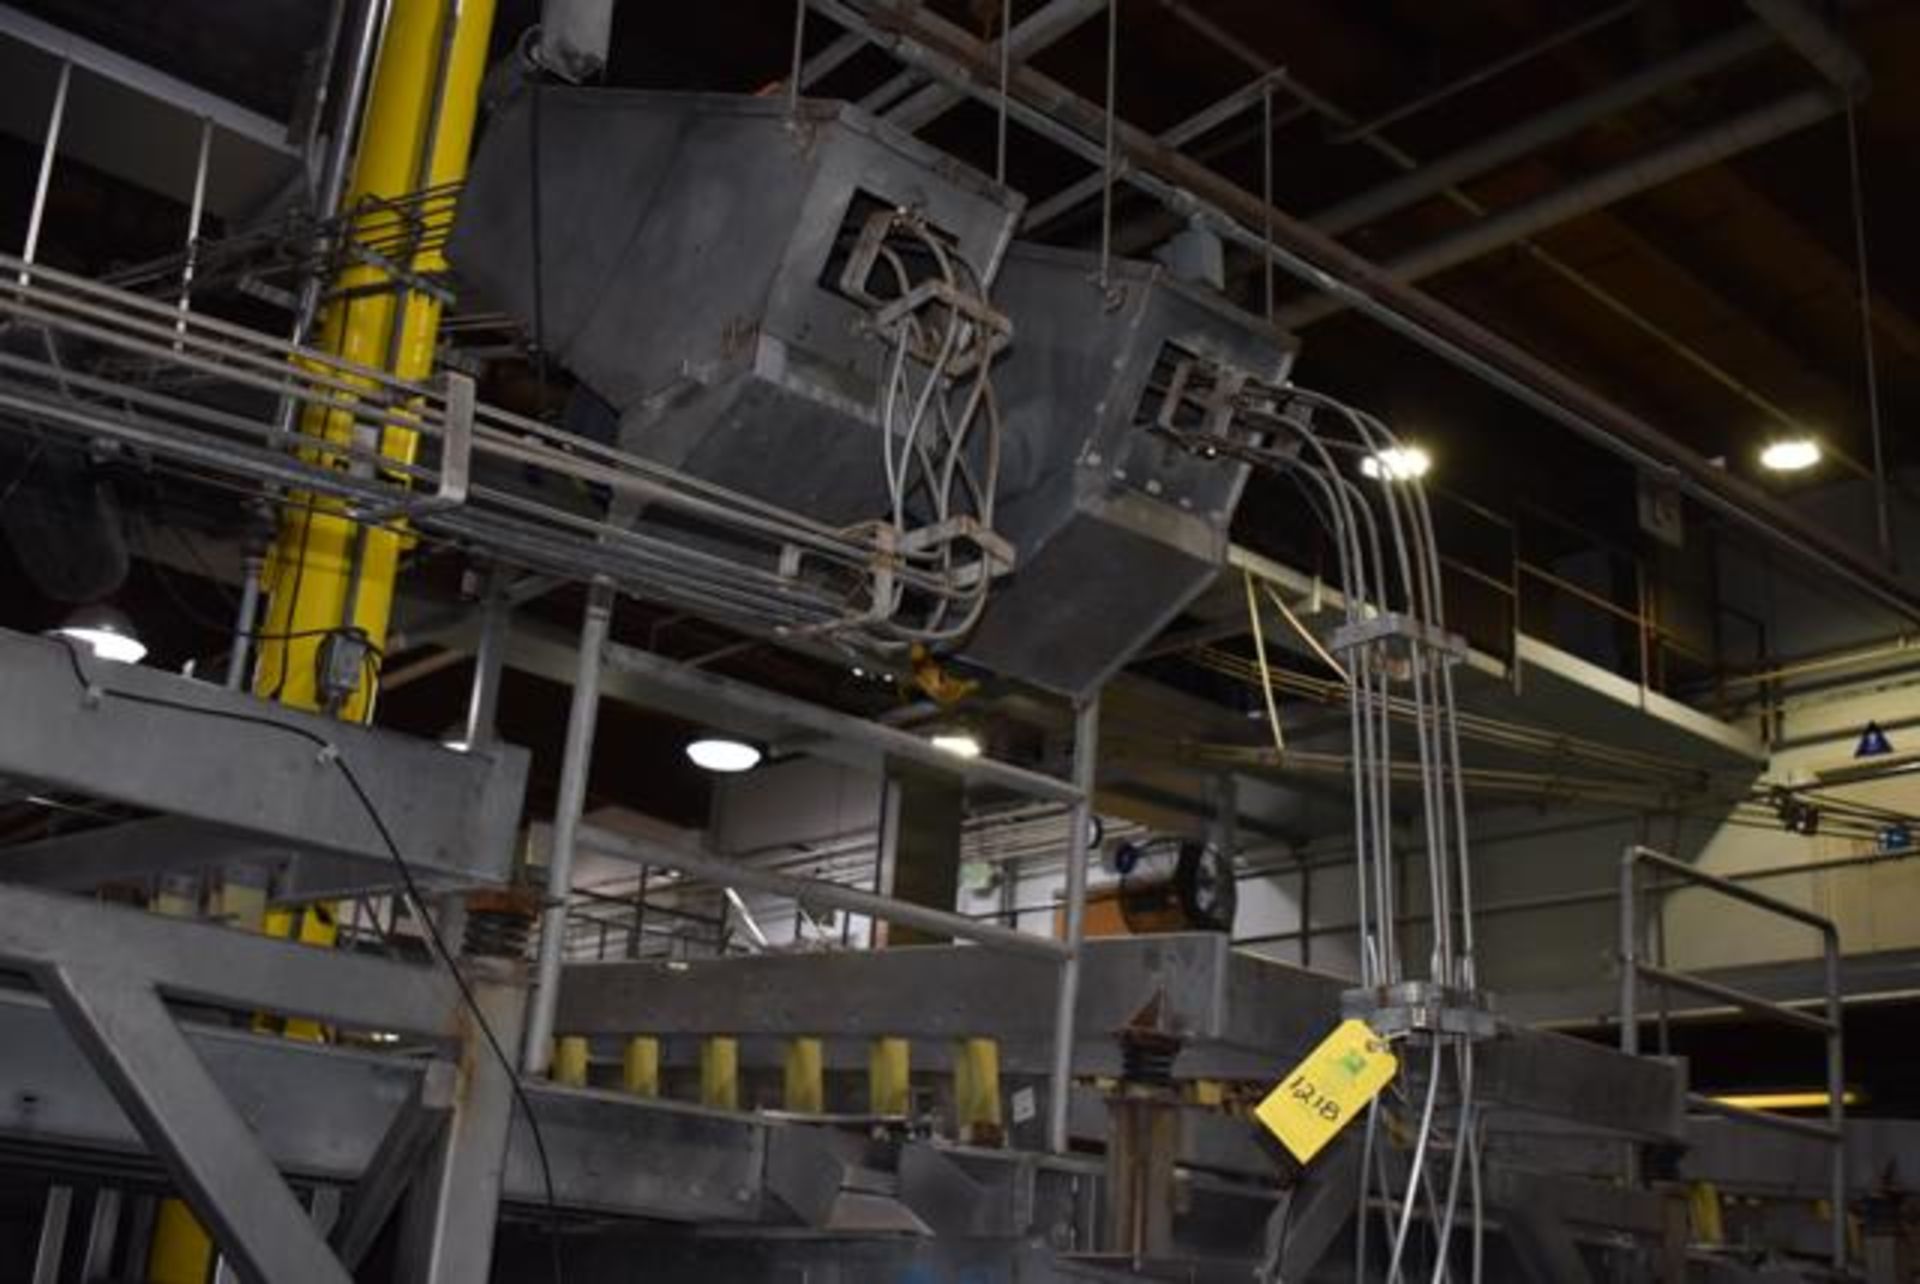 (2) Stainless Steel Can Blowers, Line AC, RIGGING FEES: $600